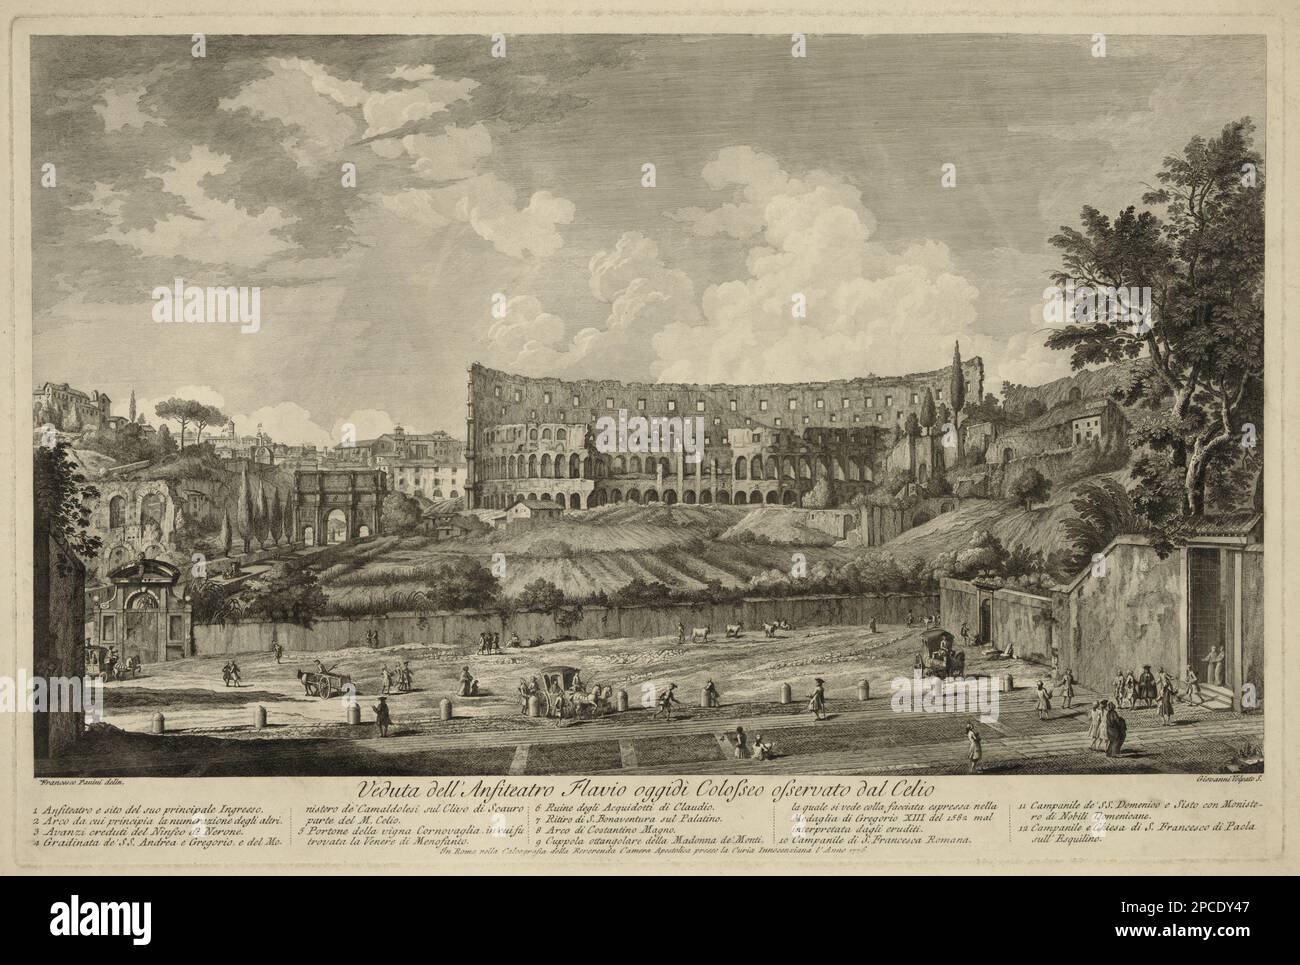 1776 , ROMA ,  ITALY : View of Rome with COLOSSEO see from the Celio . Print from a painting by FRANCESCO PANINI by Giovanni Volpato - ITALIA - FOTO STORICHE - HISTORY - GEOGRAFIA - GEOGRAPHY  - COLISEUM - ARCHITETTURA - ARCHITECTURE - ROME - ARCHEOLOGIA - ARCHEOLOGY - monumento -   - Ancient Rome - ANTICA ROMA  -  stampa - print - engraving  - panorama - landscape - paesaggio  - ANFITEATRO FLAVIO ----  Archivio GBB Stock Photo